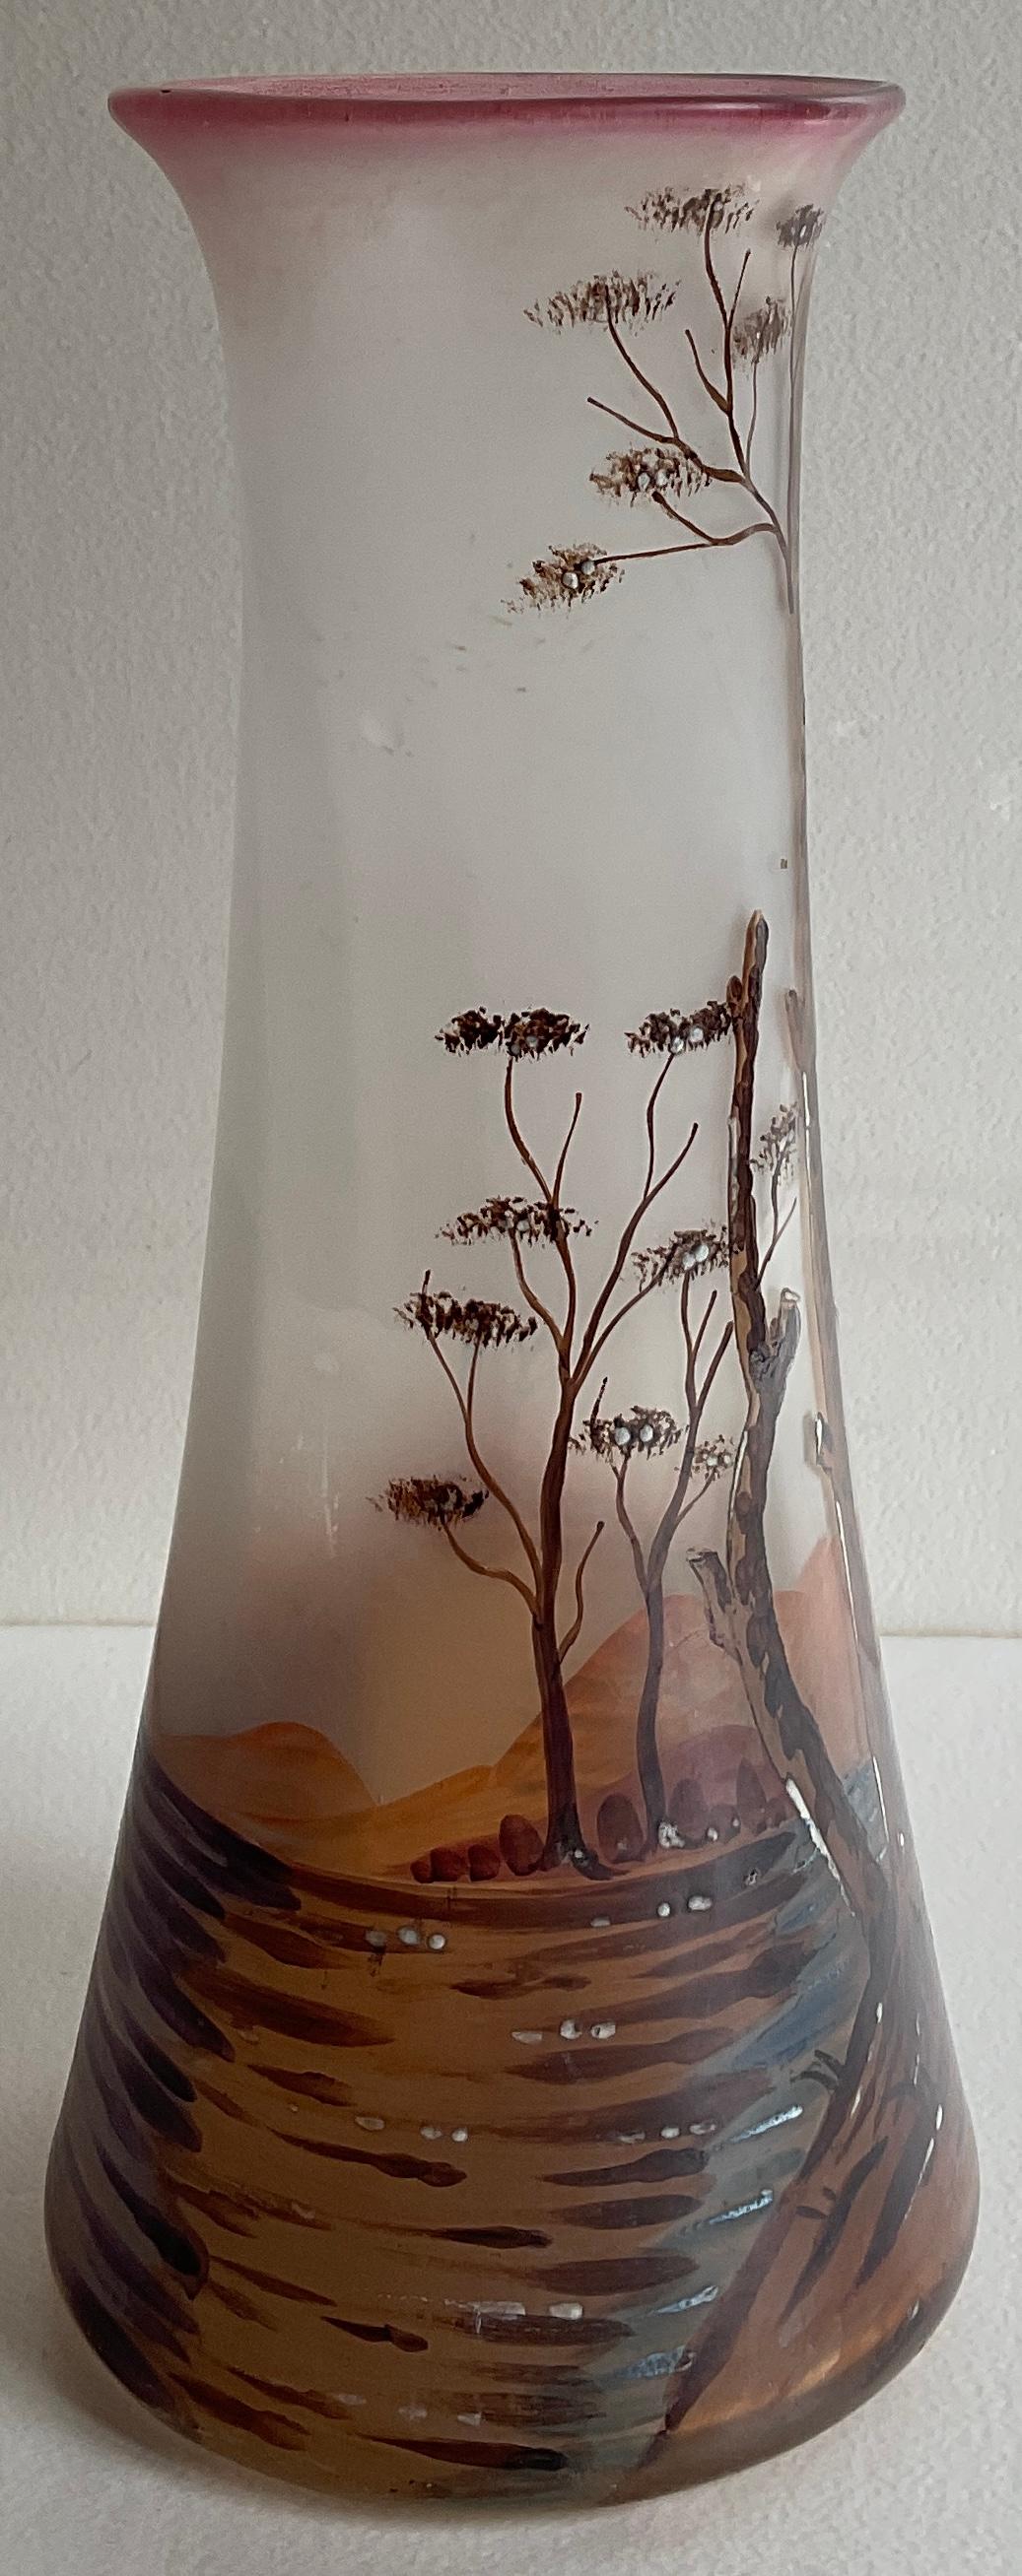 A beautiful French enameled glass vase from the Art Nouveau period, circa 1930. Intricately detailed work is by François-Théodore Legras.

The tube of this vase is enlarged and has a dark pink background. It is decorated with trees, a bird, plants